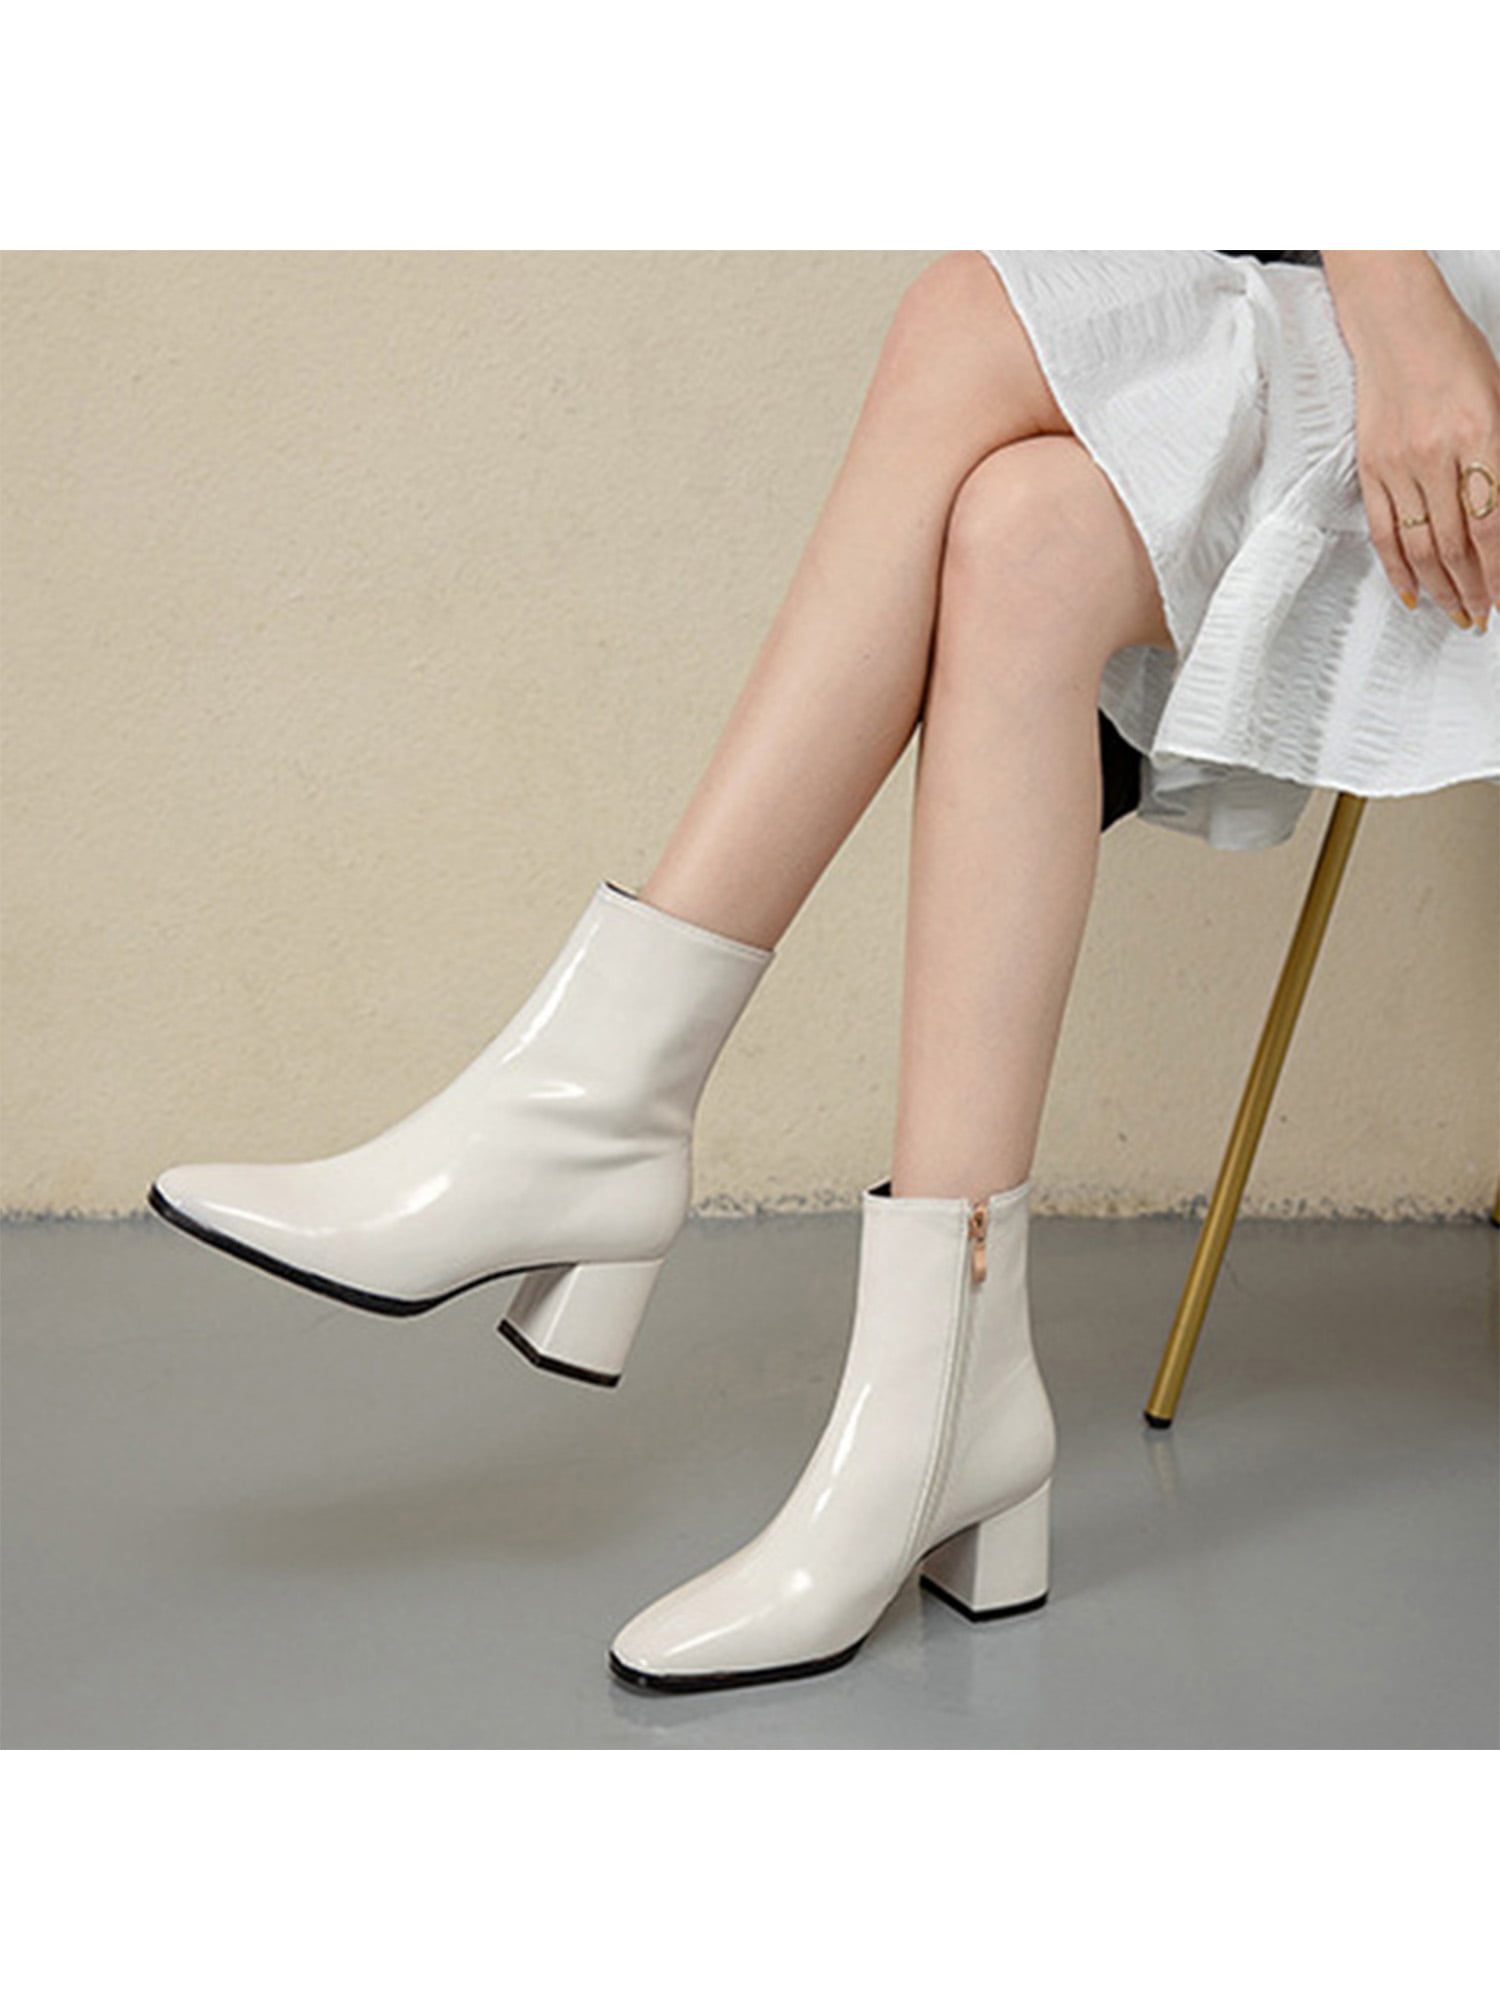 AOVIN Ankle Boots for Women Low Heel Chunky Heel Crystal Buckle Round Toe  Chelsea Boots Daily Faux Leather Winter Loafer (Colour : White, Size : 39.5  EU) : Amazon.de: Fashion